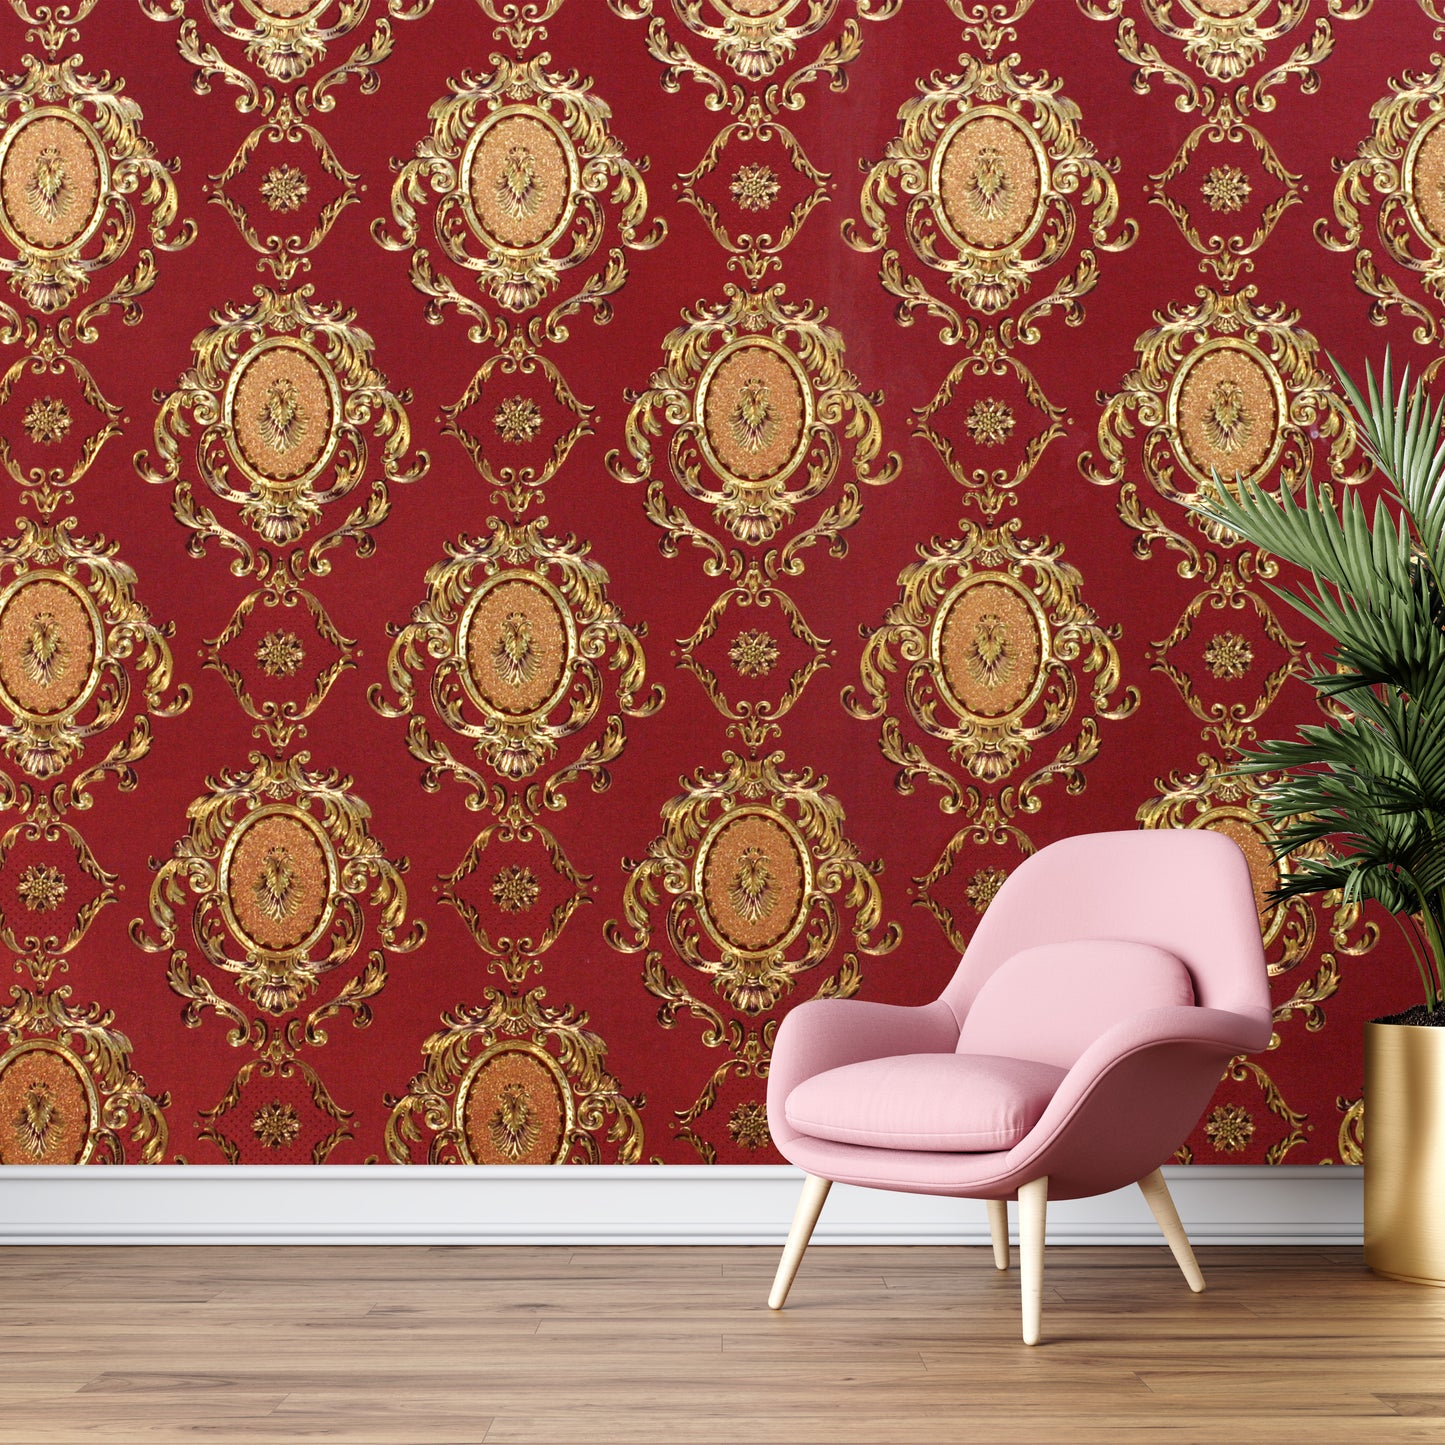 Red floral wallpaper for wall